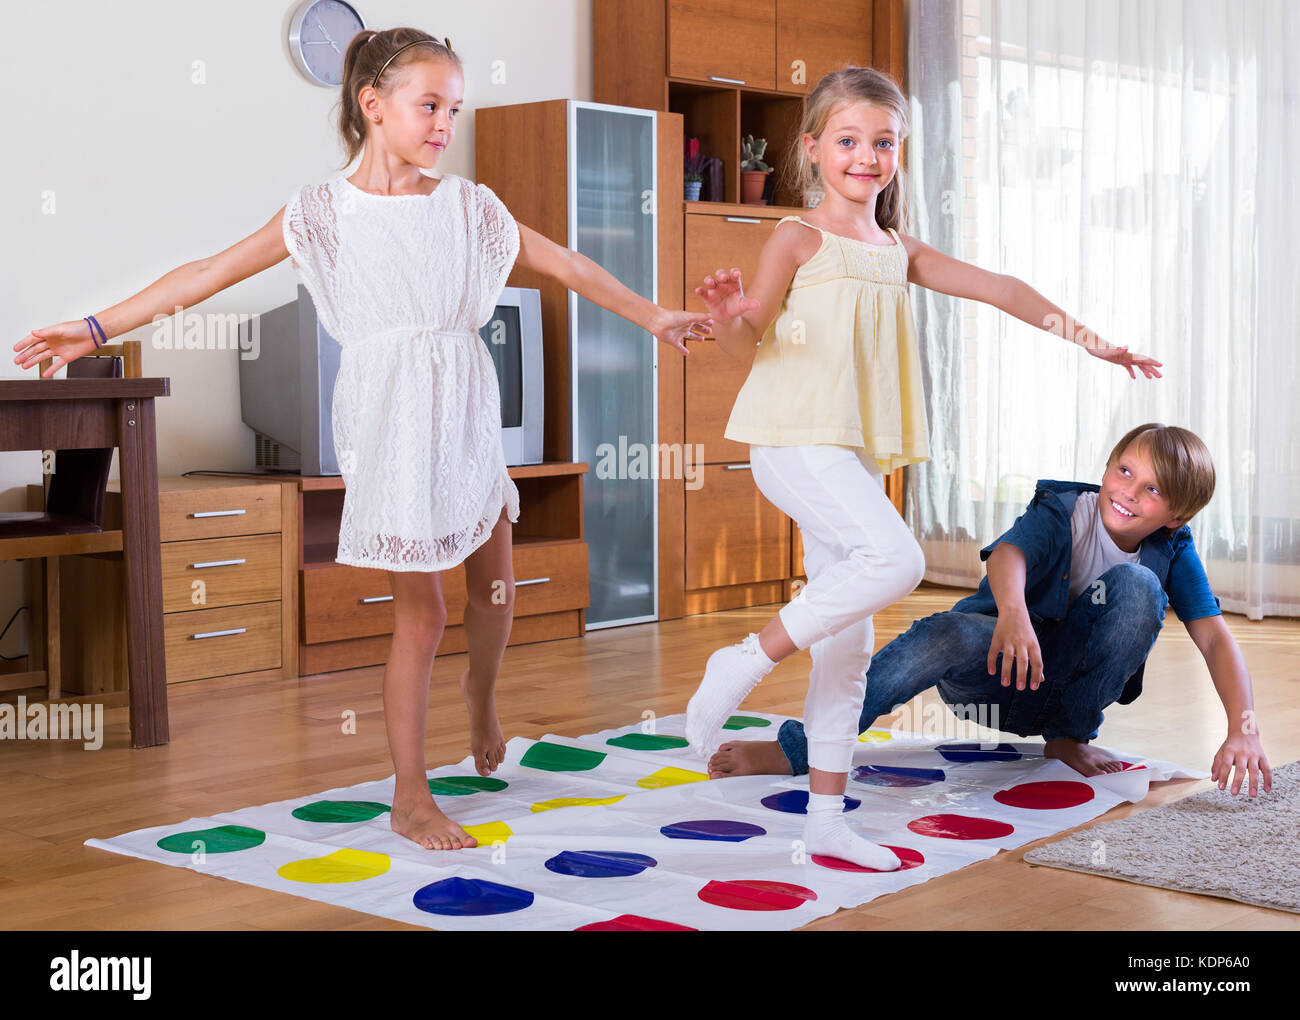 Group of happy children playing at twister in house Stock Photo